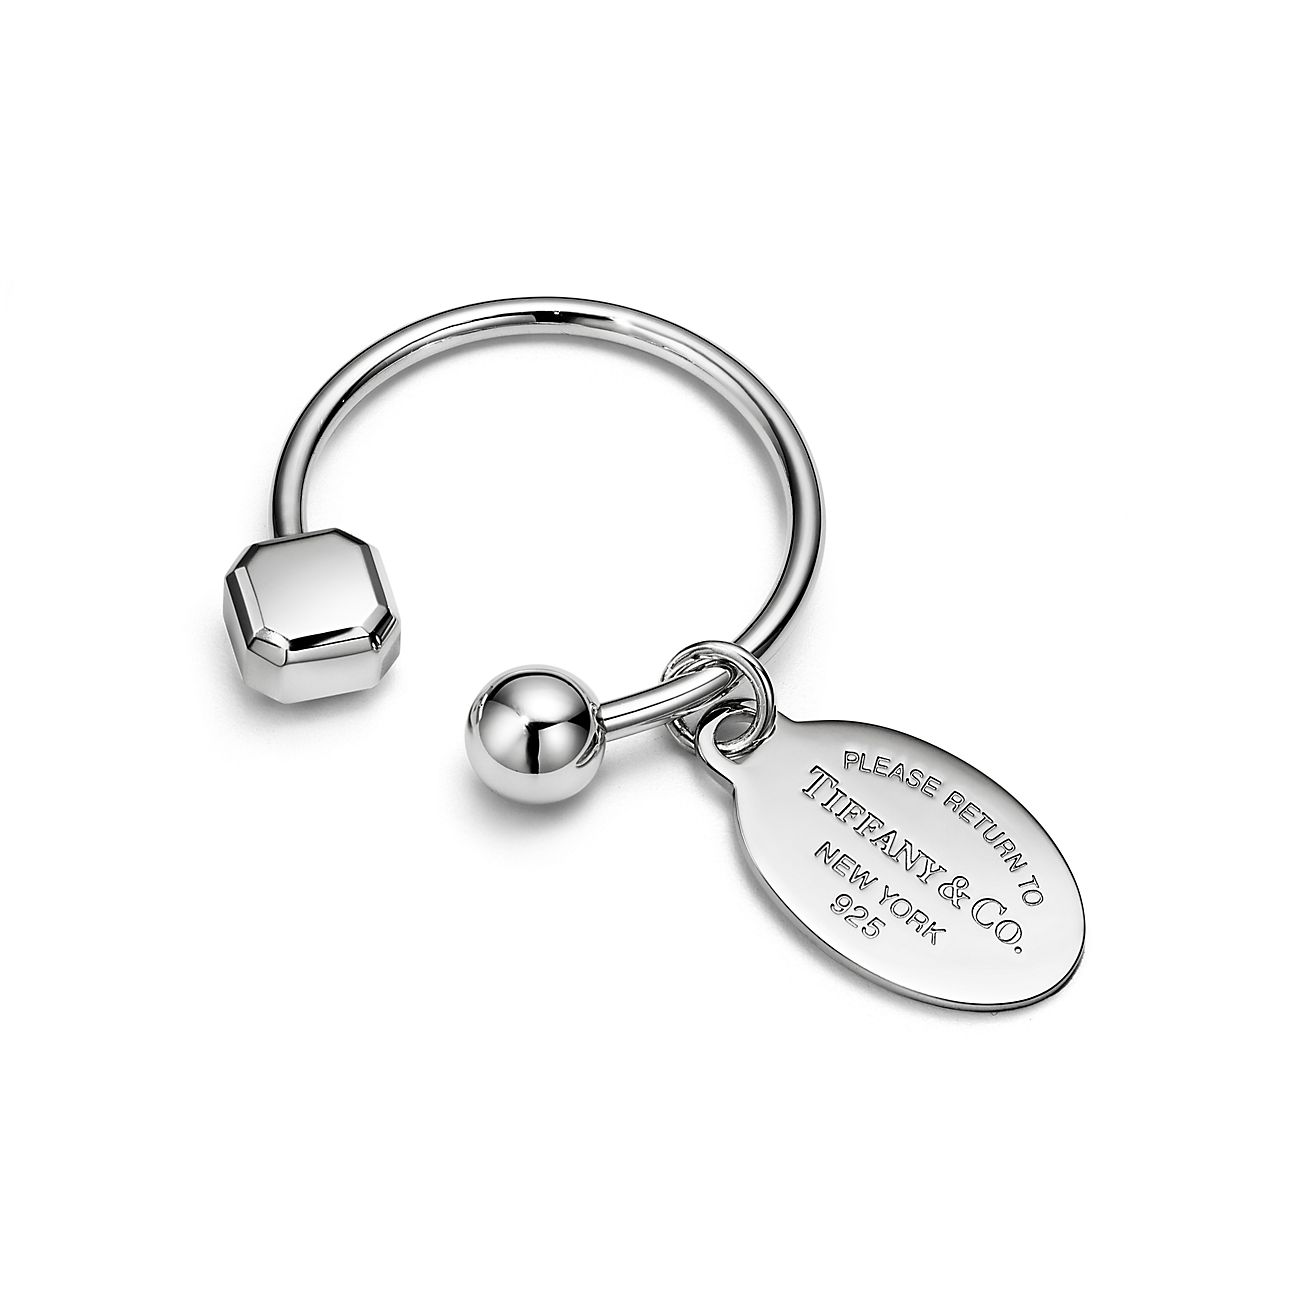 Round Metal Silver Keychains - TAG UP